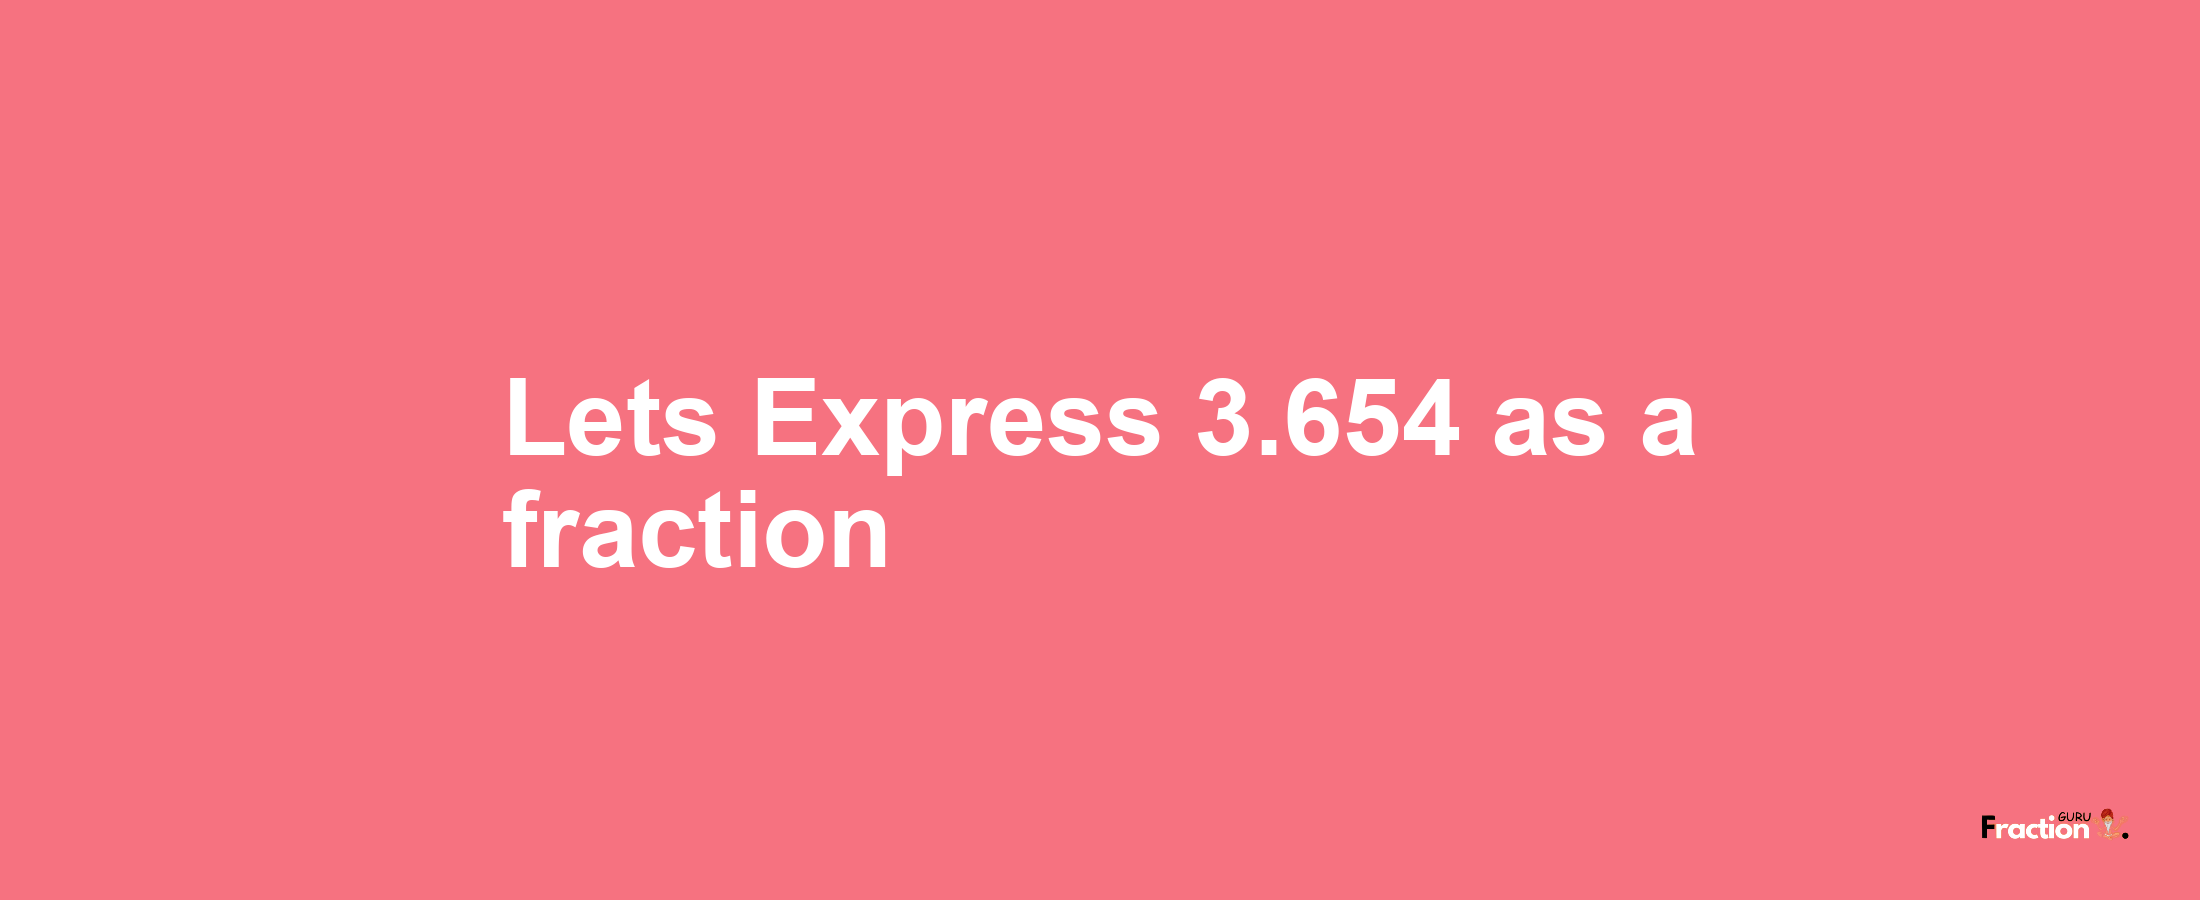 Lets Express 3.654 as afraction